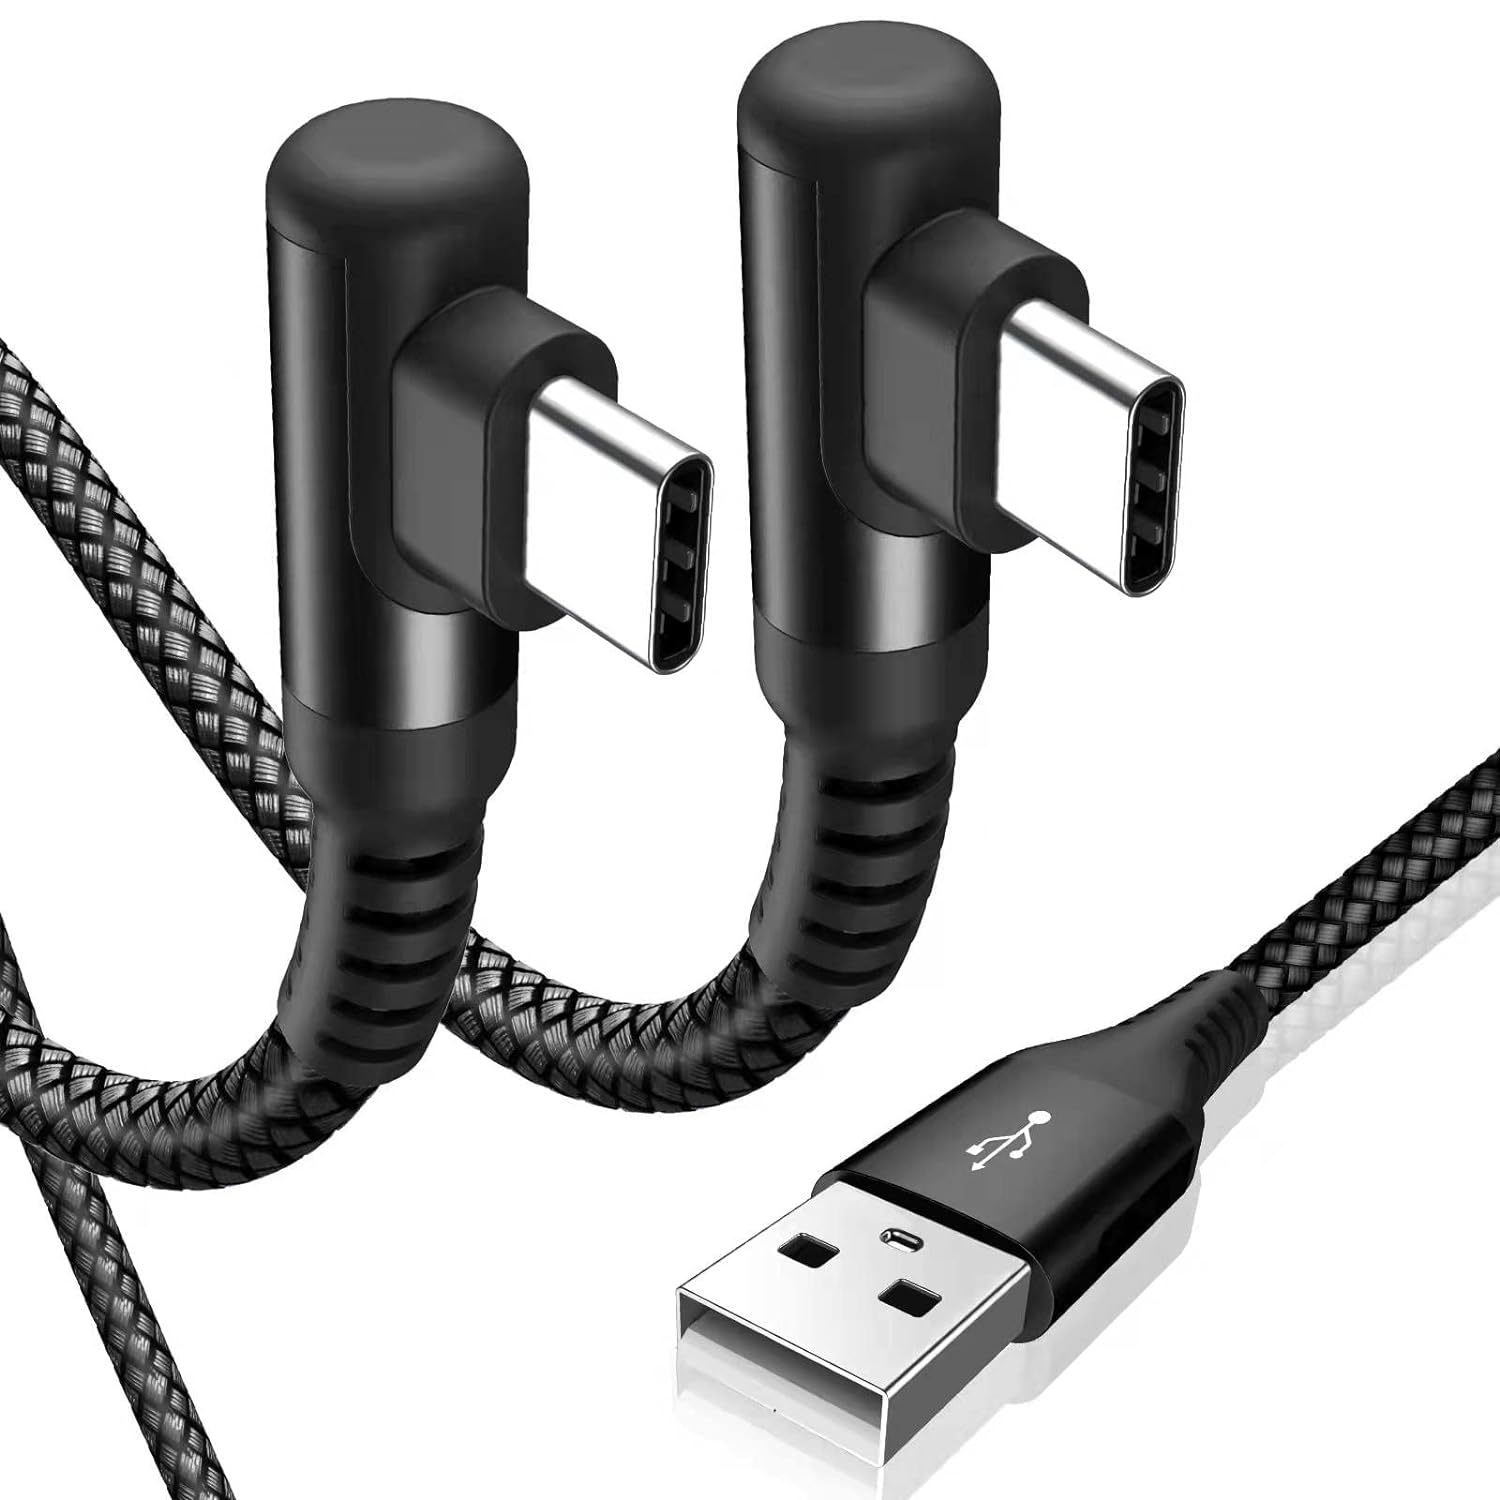 Usb C Cable 3.1A Fast Charging Cord 10Ft 2 and 50 similar items